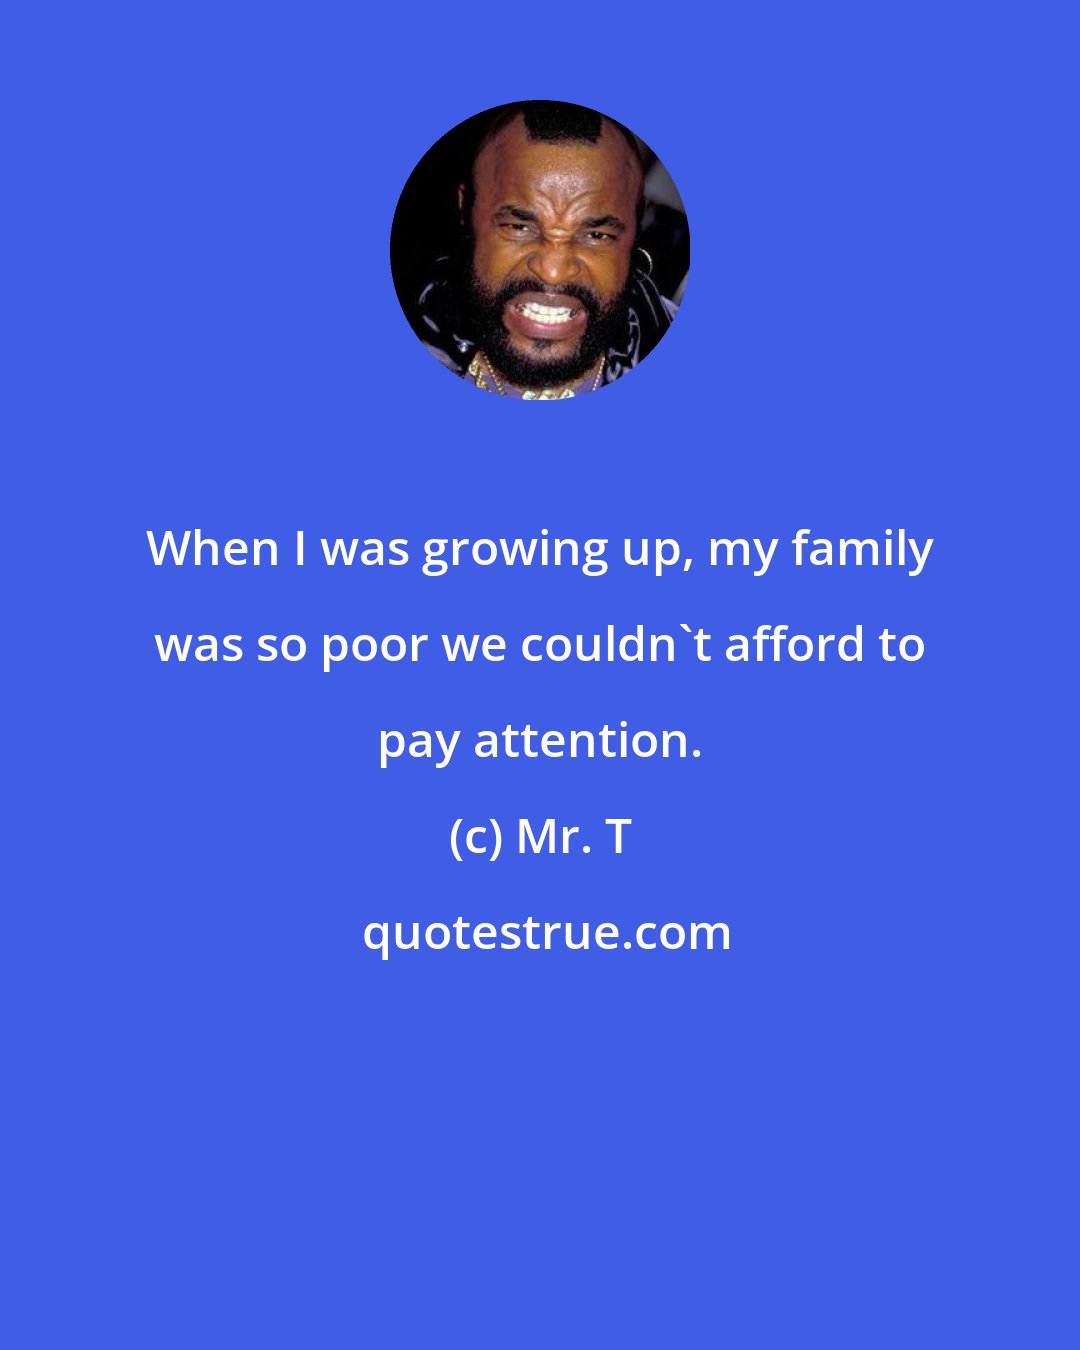 Mr. T: When I was growing up, my family was so poor we couldn't afford to pay attention.